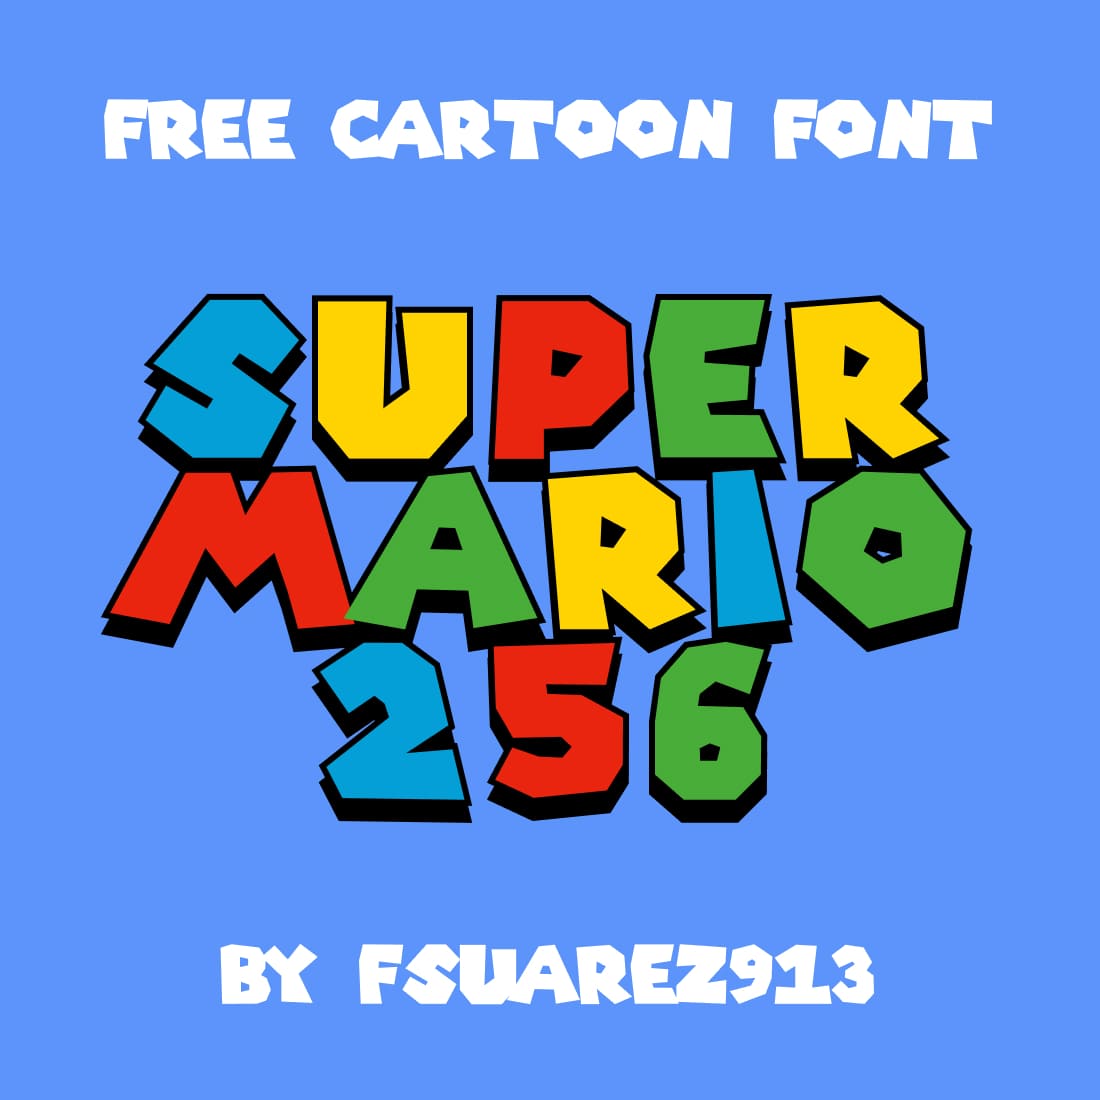 It is a wonderful font for cartoons and children's magazines.